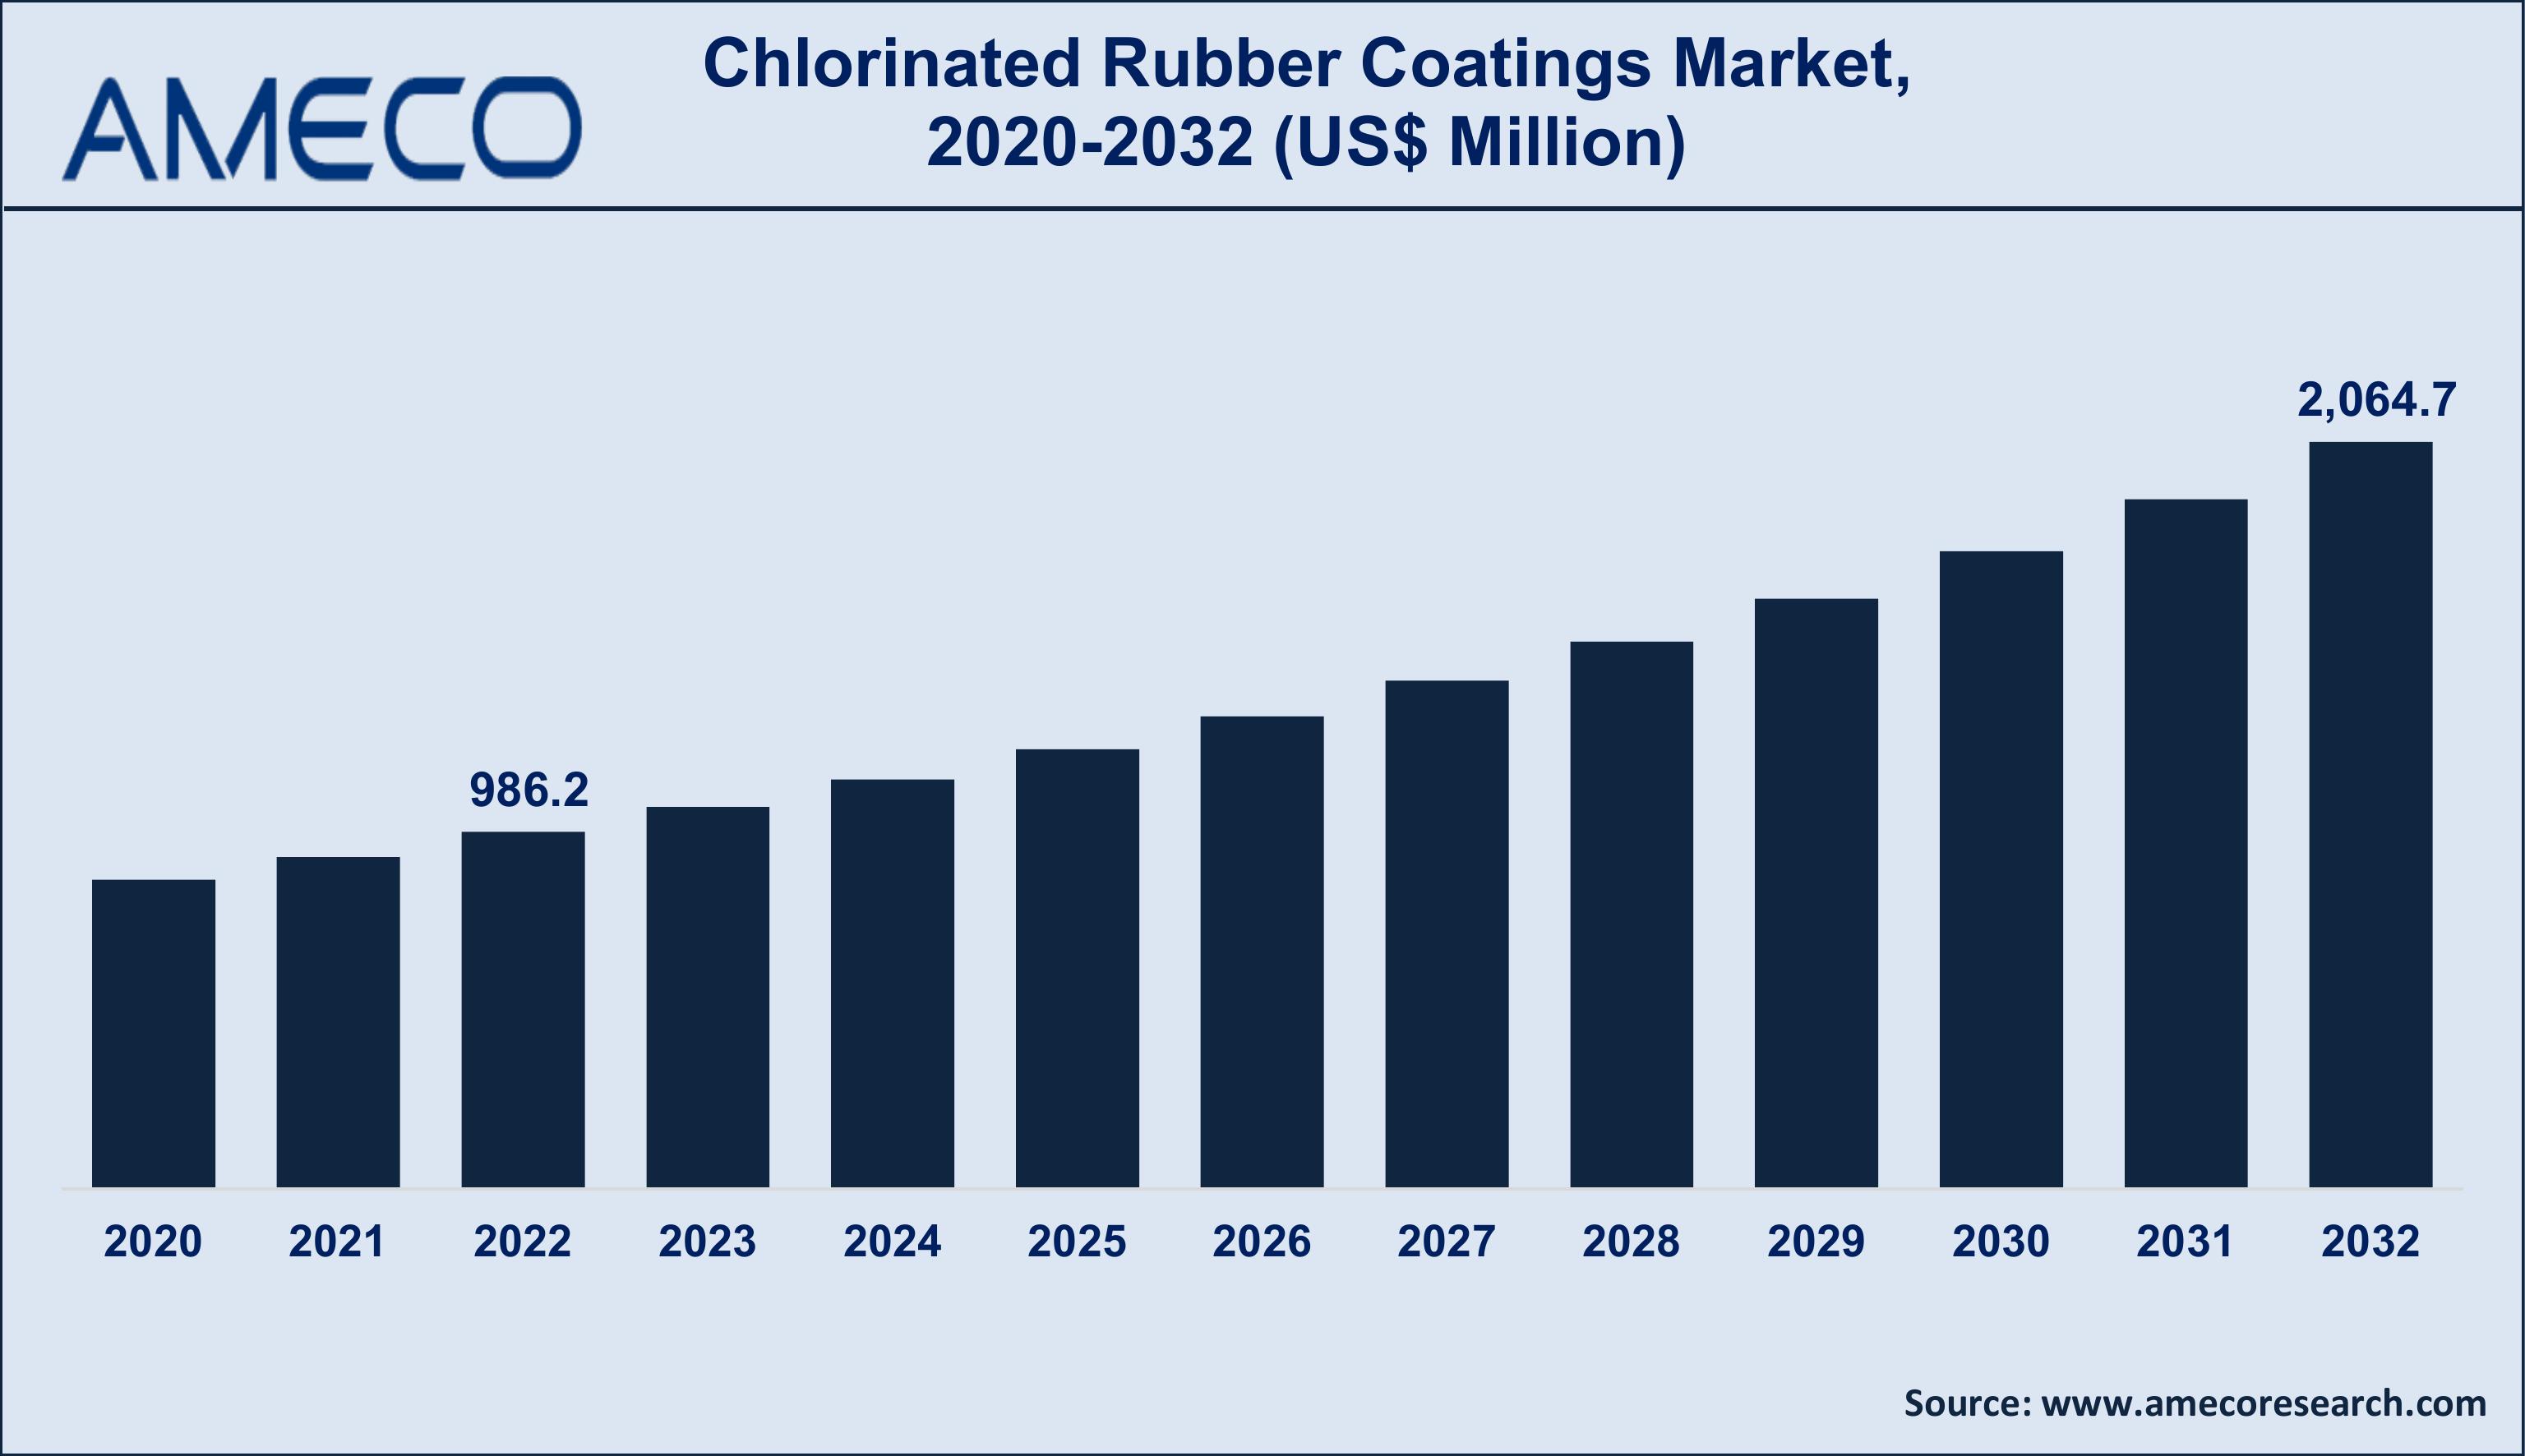 Chlorinated Rubber Coating Market Trends